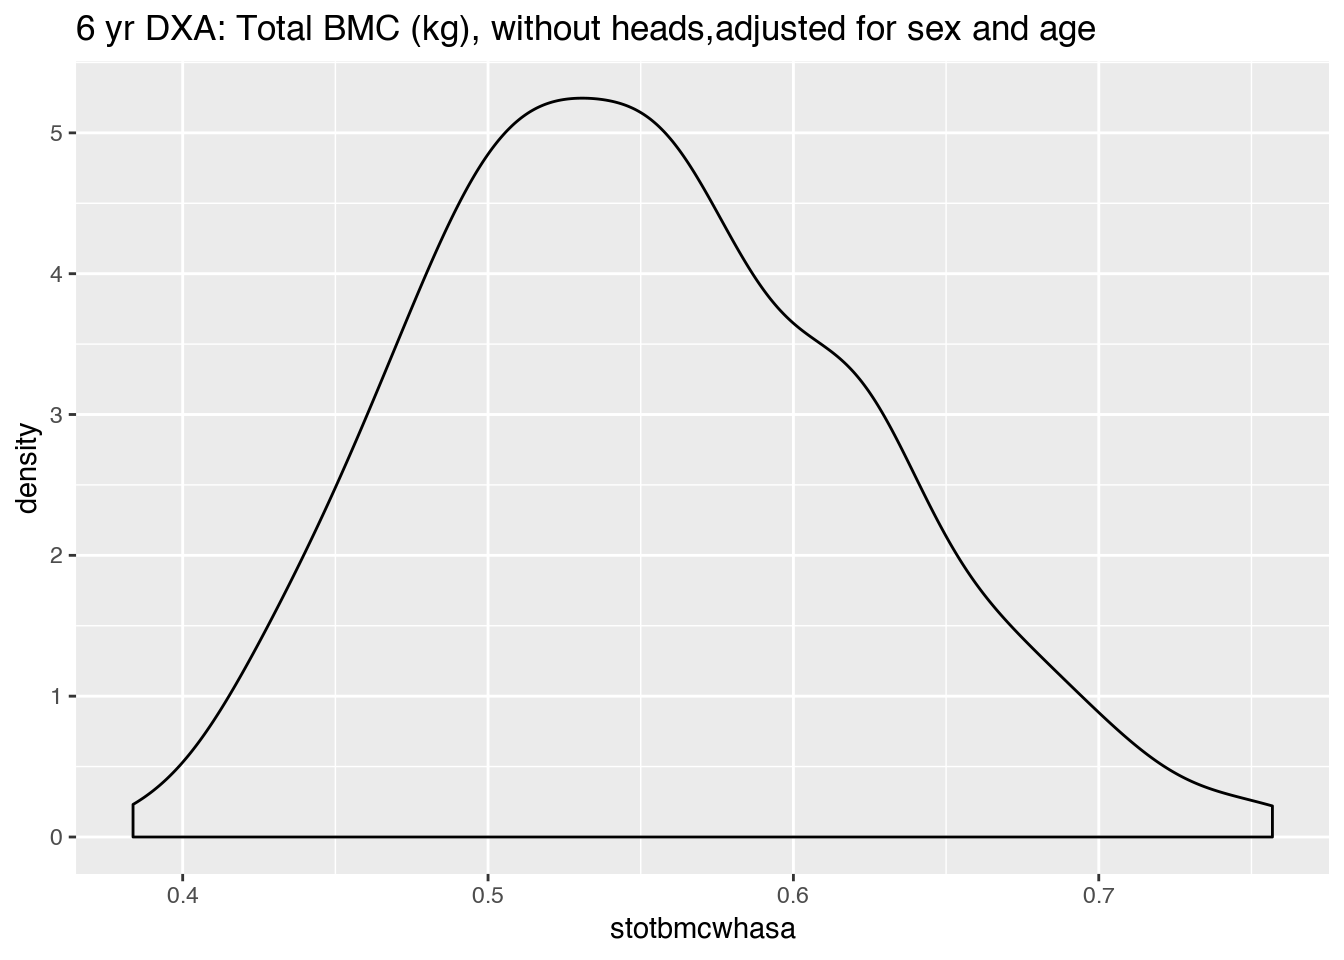 Distribution of whole body (minus head) bone mineral content in kg (stotbmcwhasa) at 6 years of age (n = 402), adjusted for sex and age, as measured by DXA.